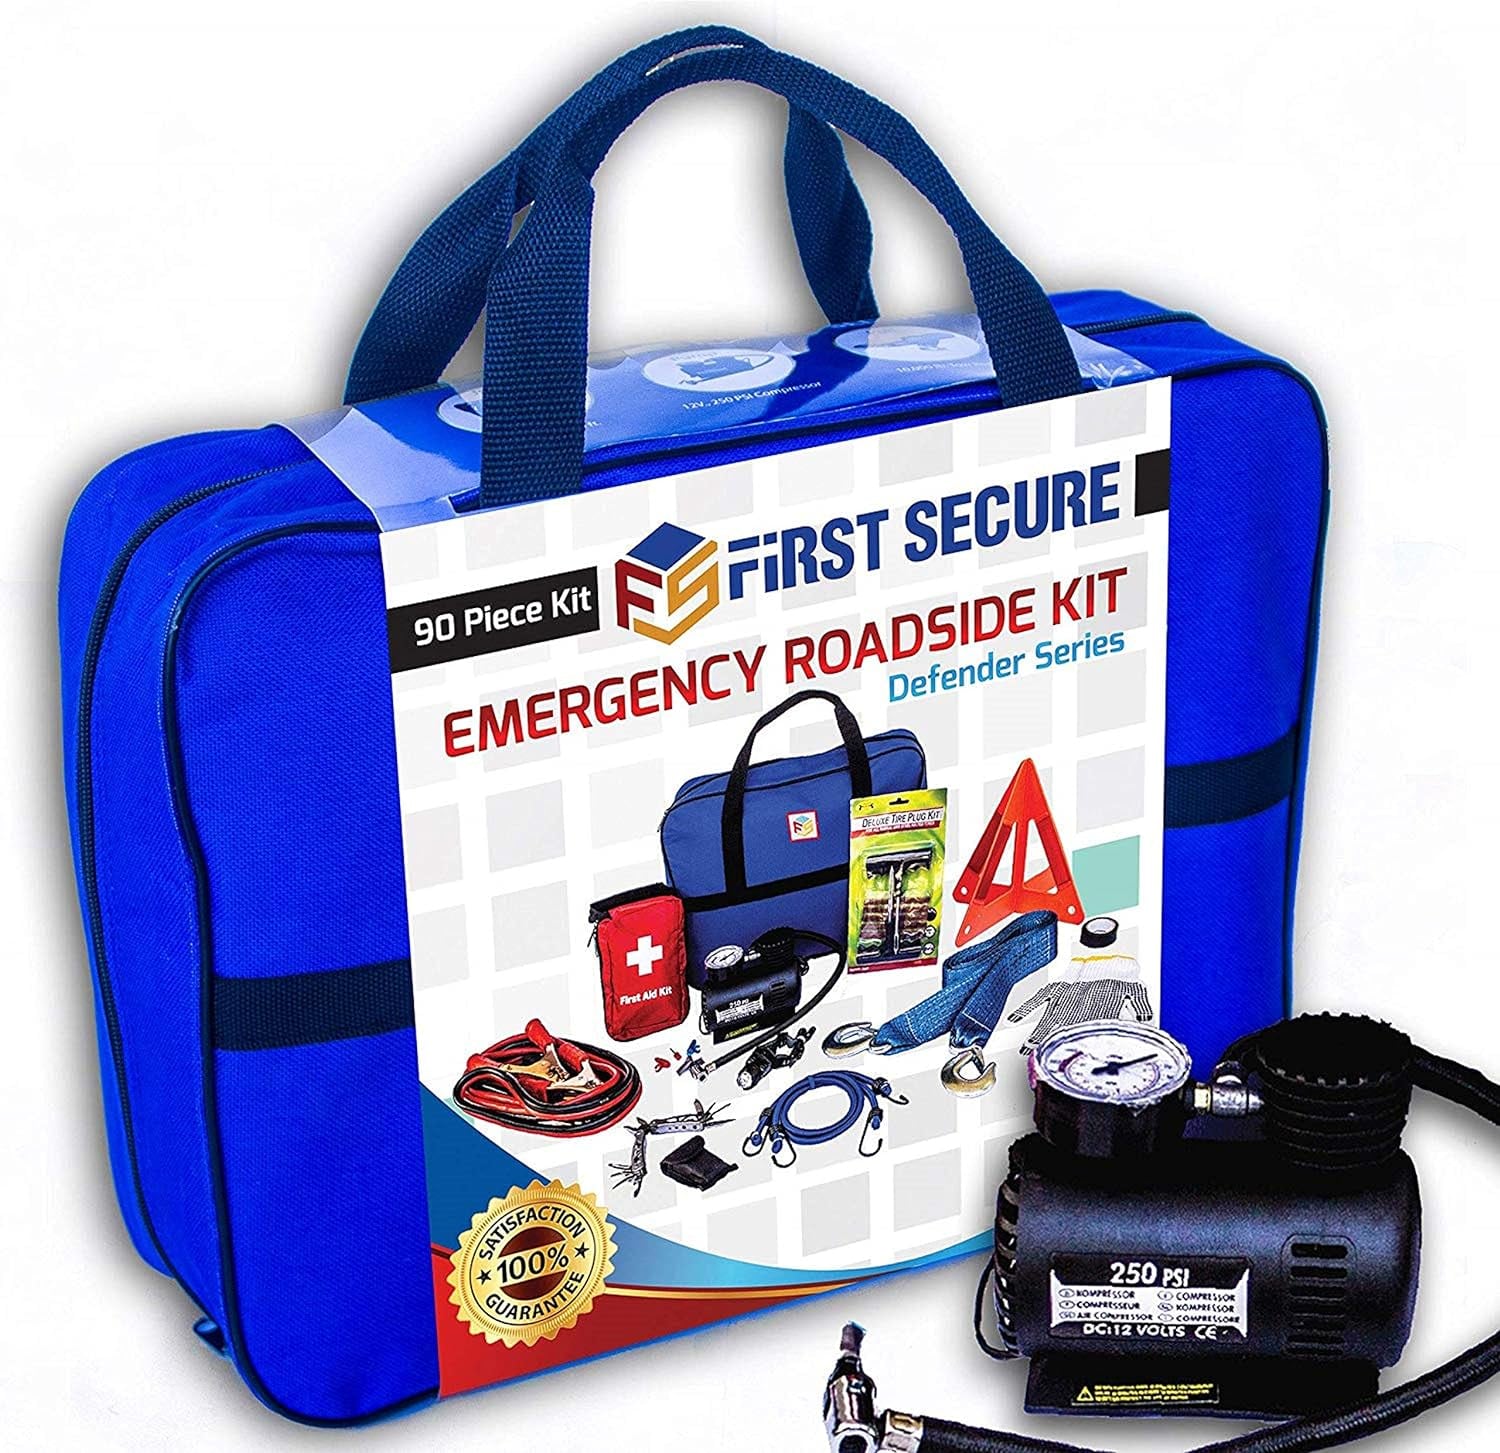 <p><a href="https://www.amazon.com/First-Secure-Emergency-Assistance-Compressor/dp/B01C96AFWU/">BUY NOW</a></p><p>$90</p><p><a href="https://www.amazon.com/First-Secure-Emergency-Assistance-Compressor/dp/B01C96AFWU/" class="ga-track"><strong>First Secure 90-Piece Car Emergency Roadside and First Aid Kit</strong></a> ($90)</p> <p>Keep this roadside kit in the car in case of emergency. The thorough, 90-piece purchase includes jumper cables, tire repair tools, a flashlight, and a first aid safety kit, which is also smart to have with you during your travels.</p>